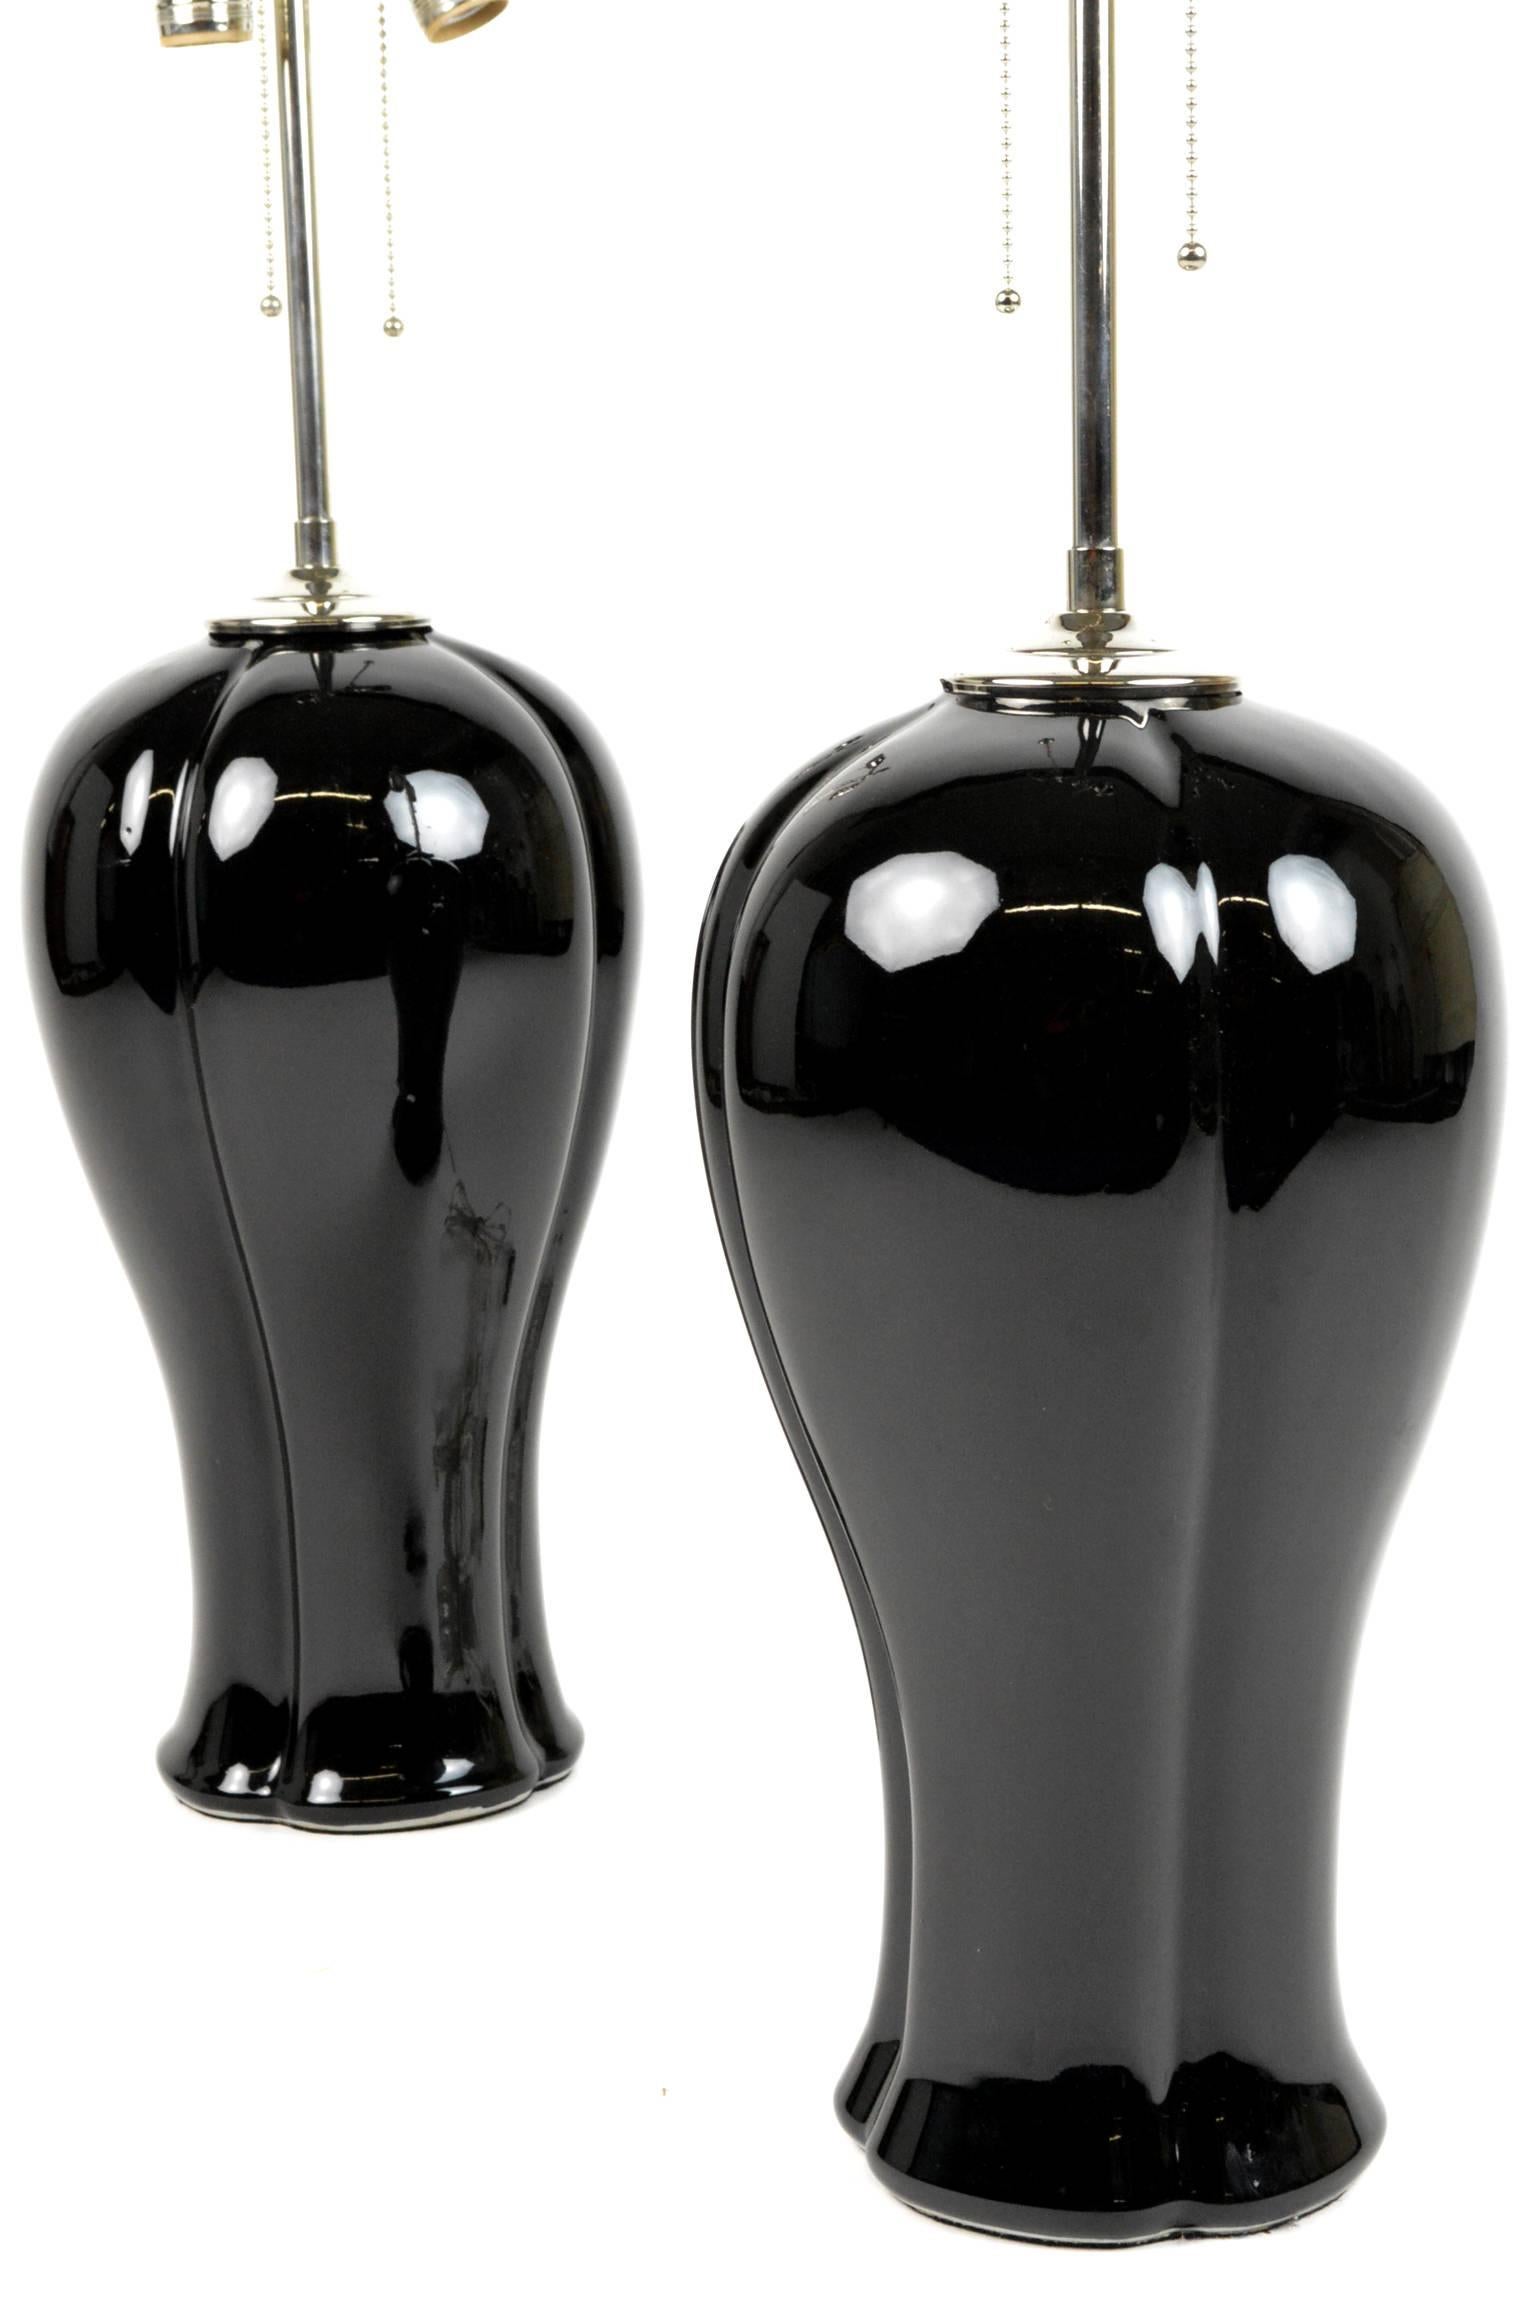 Pair of elegant table lamps with sleek forms in black glazed ceramic with silver plated mounts. Rewired.
27